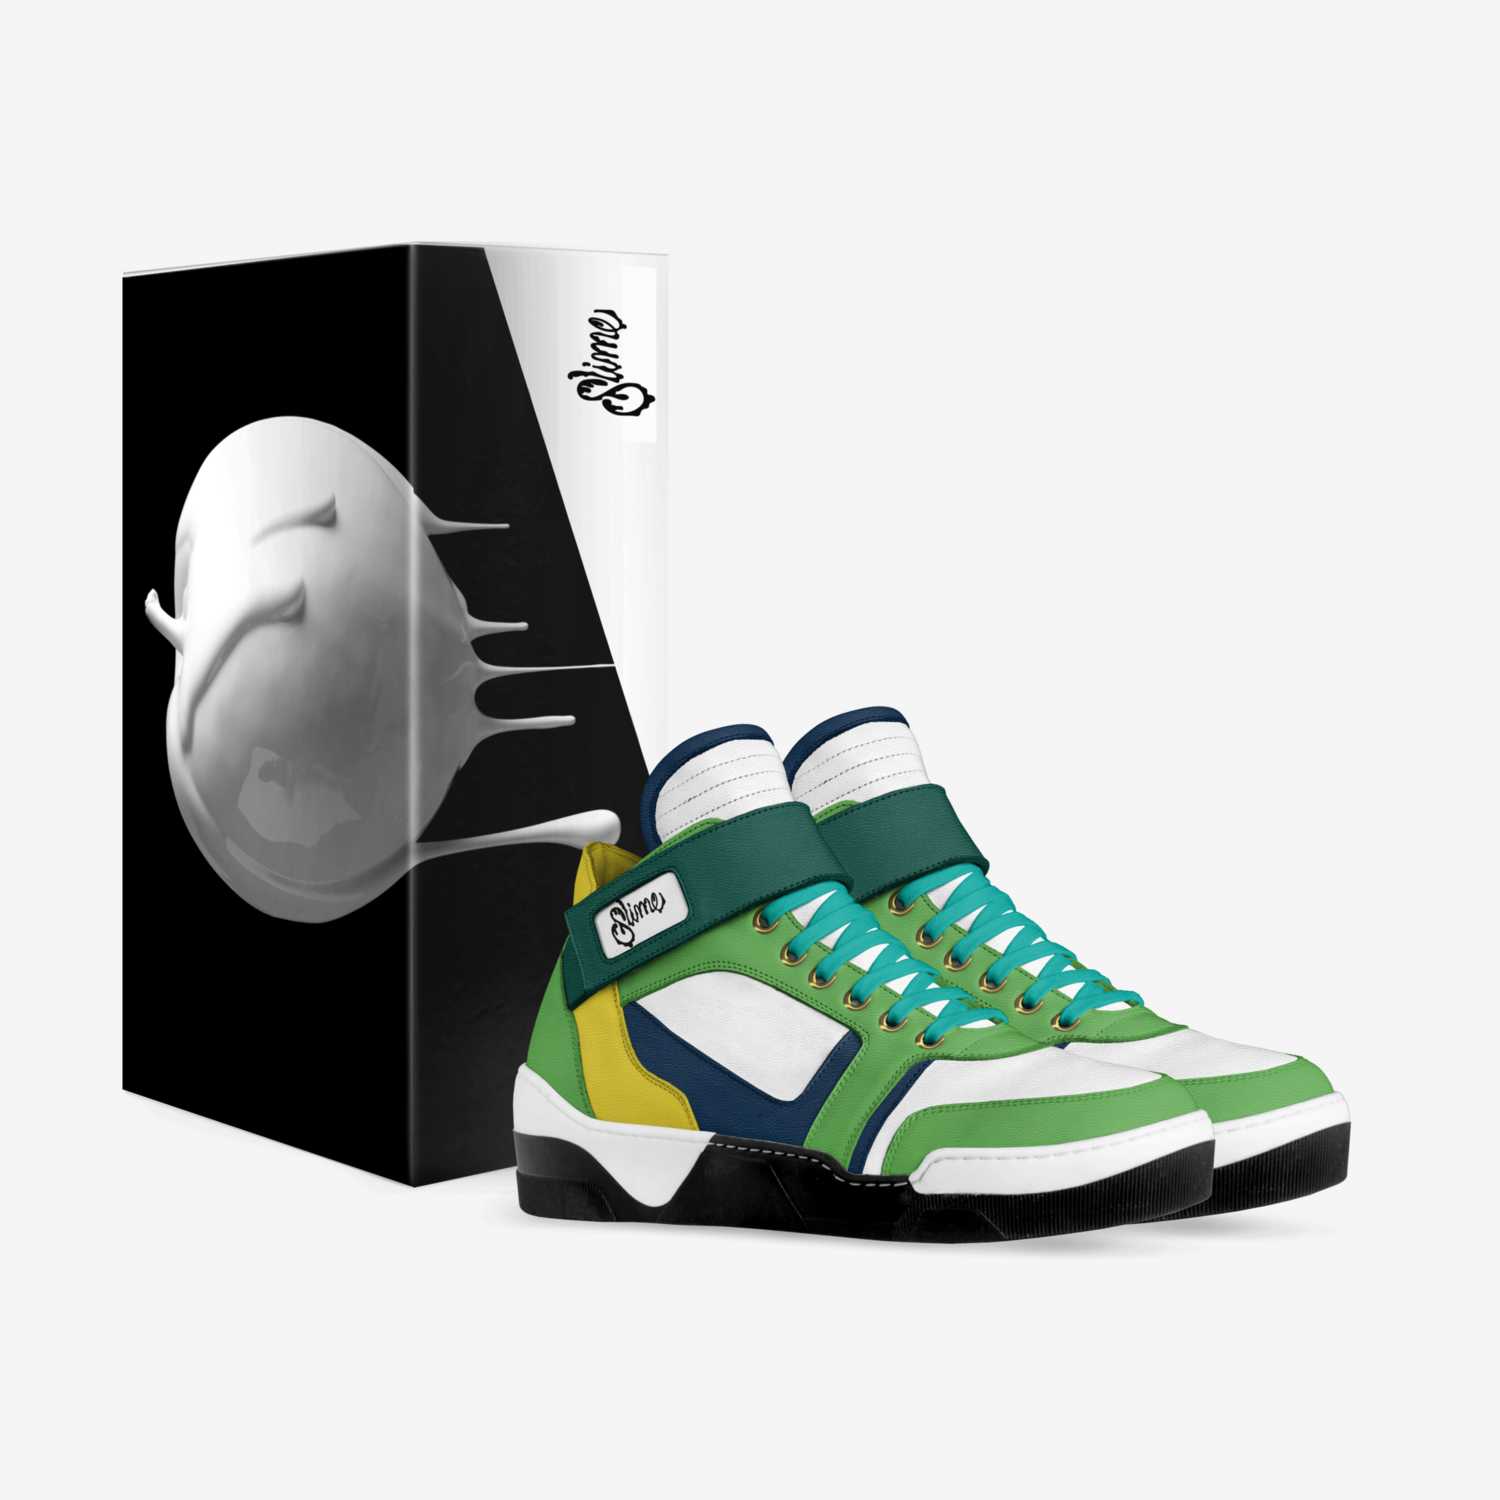 Slime | A Custom Shoe concept by Jaylen Gomes